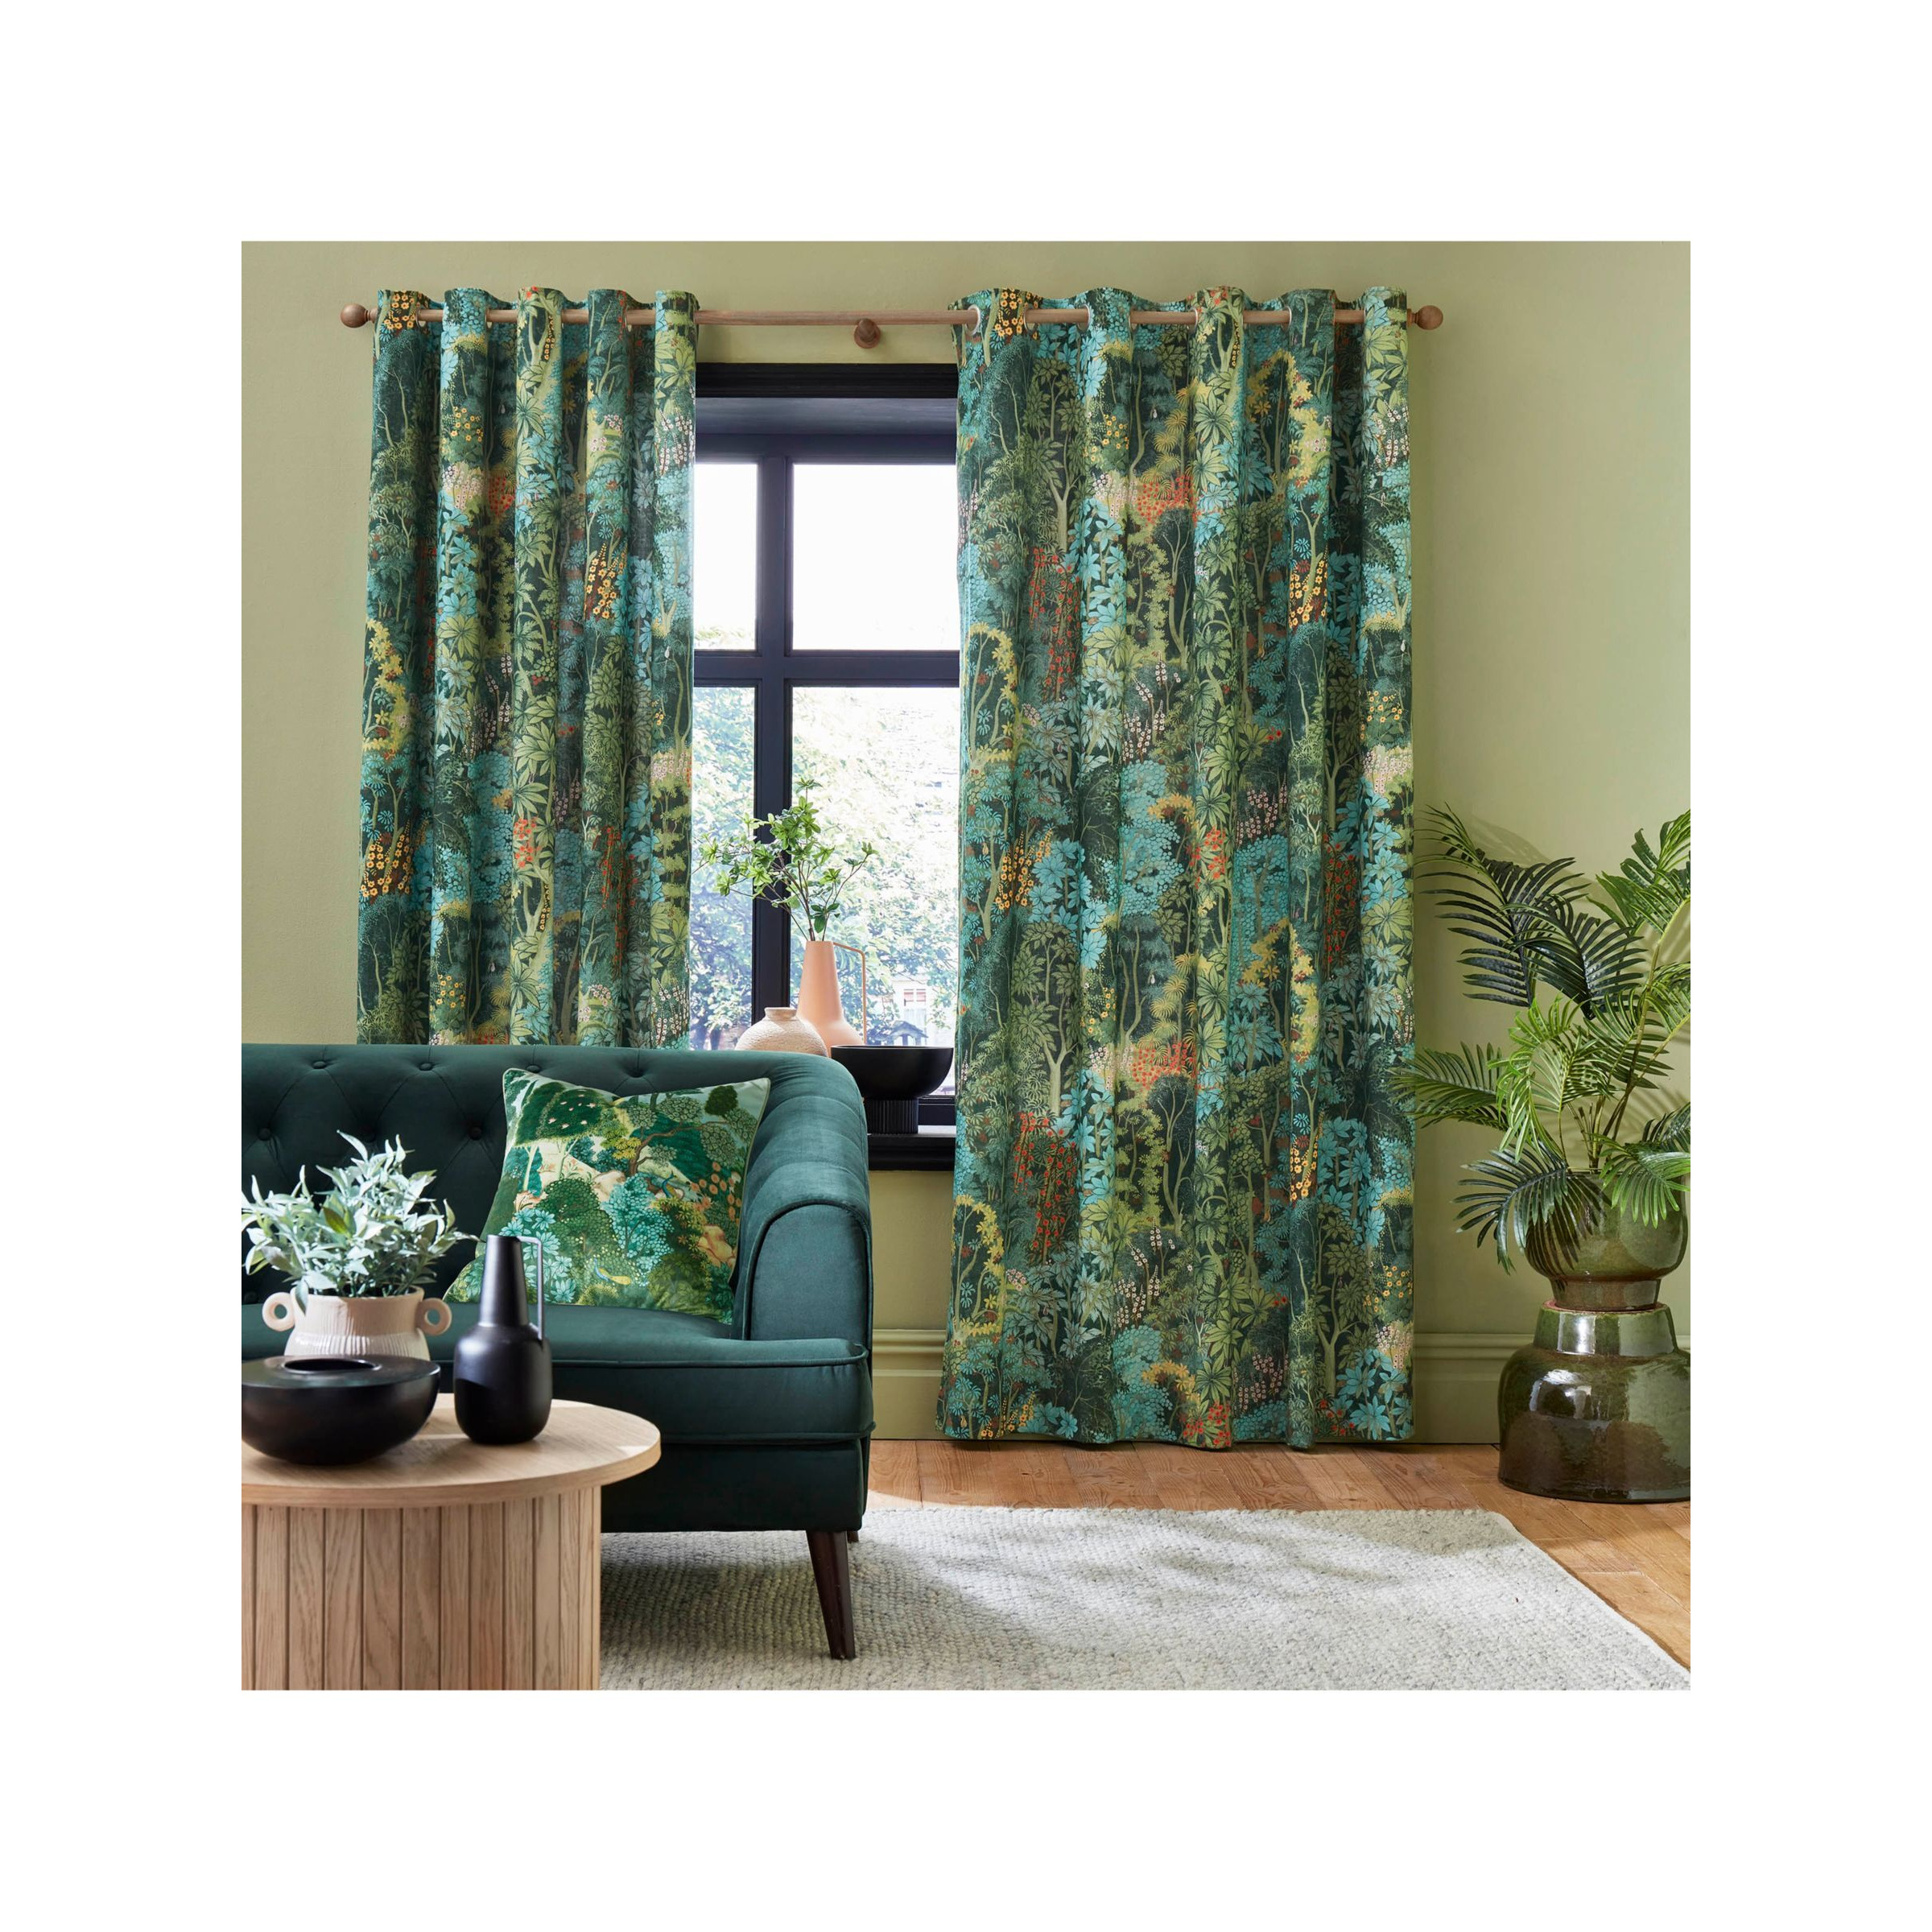 Graham & Brown New Eden Pair Lined Eyelet Curtains, Emerald - image 1